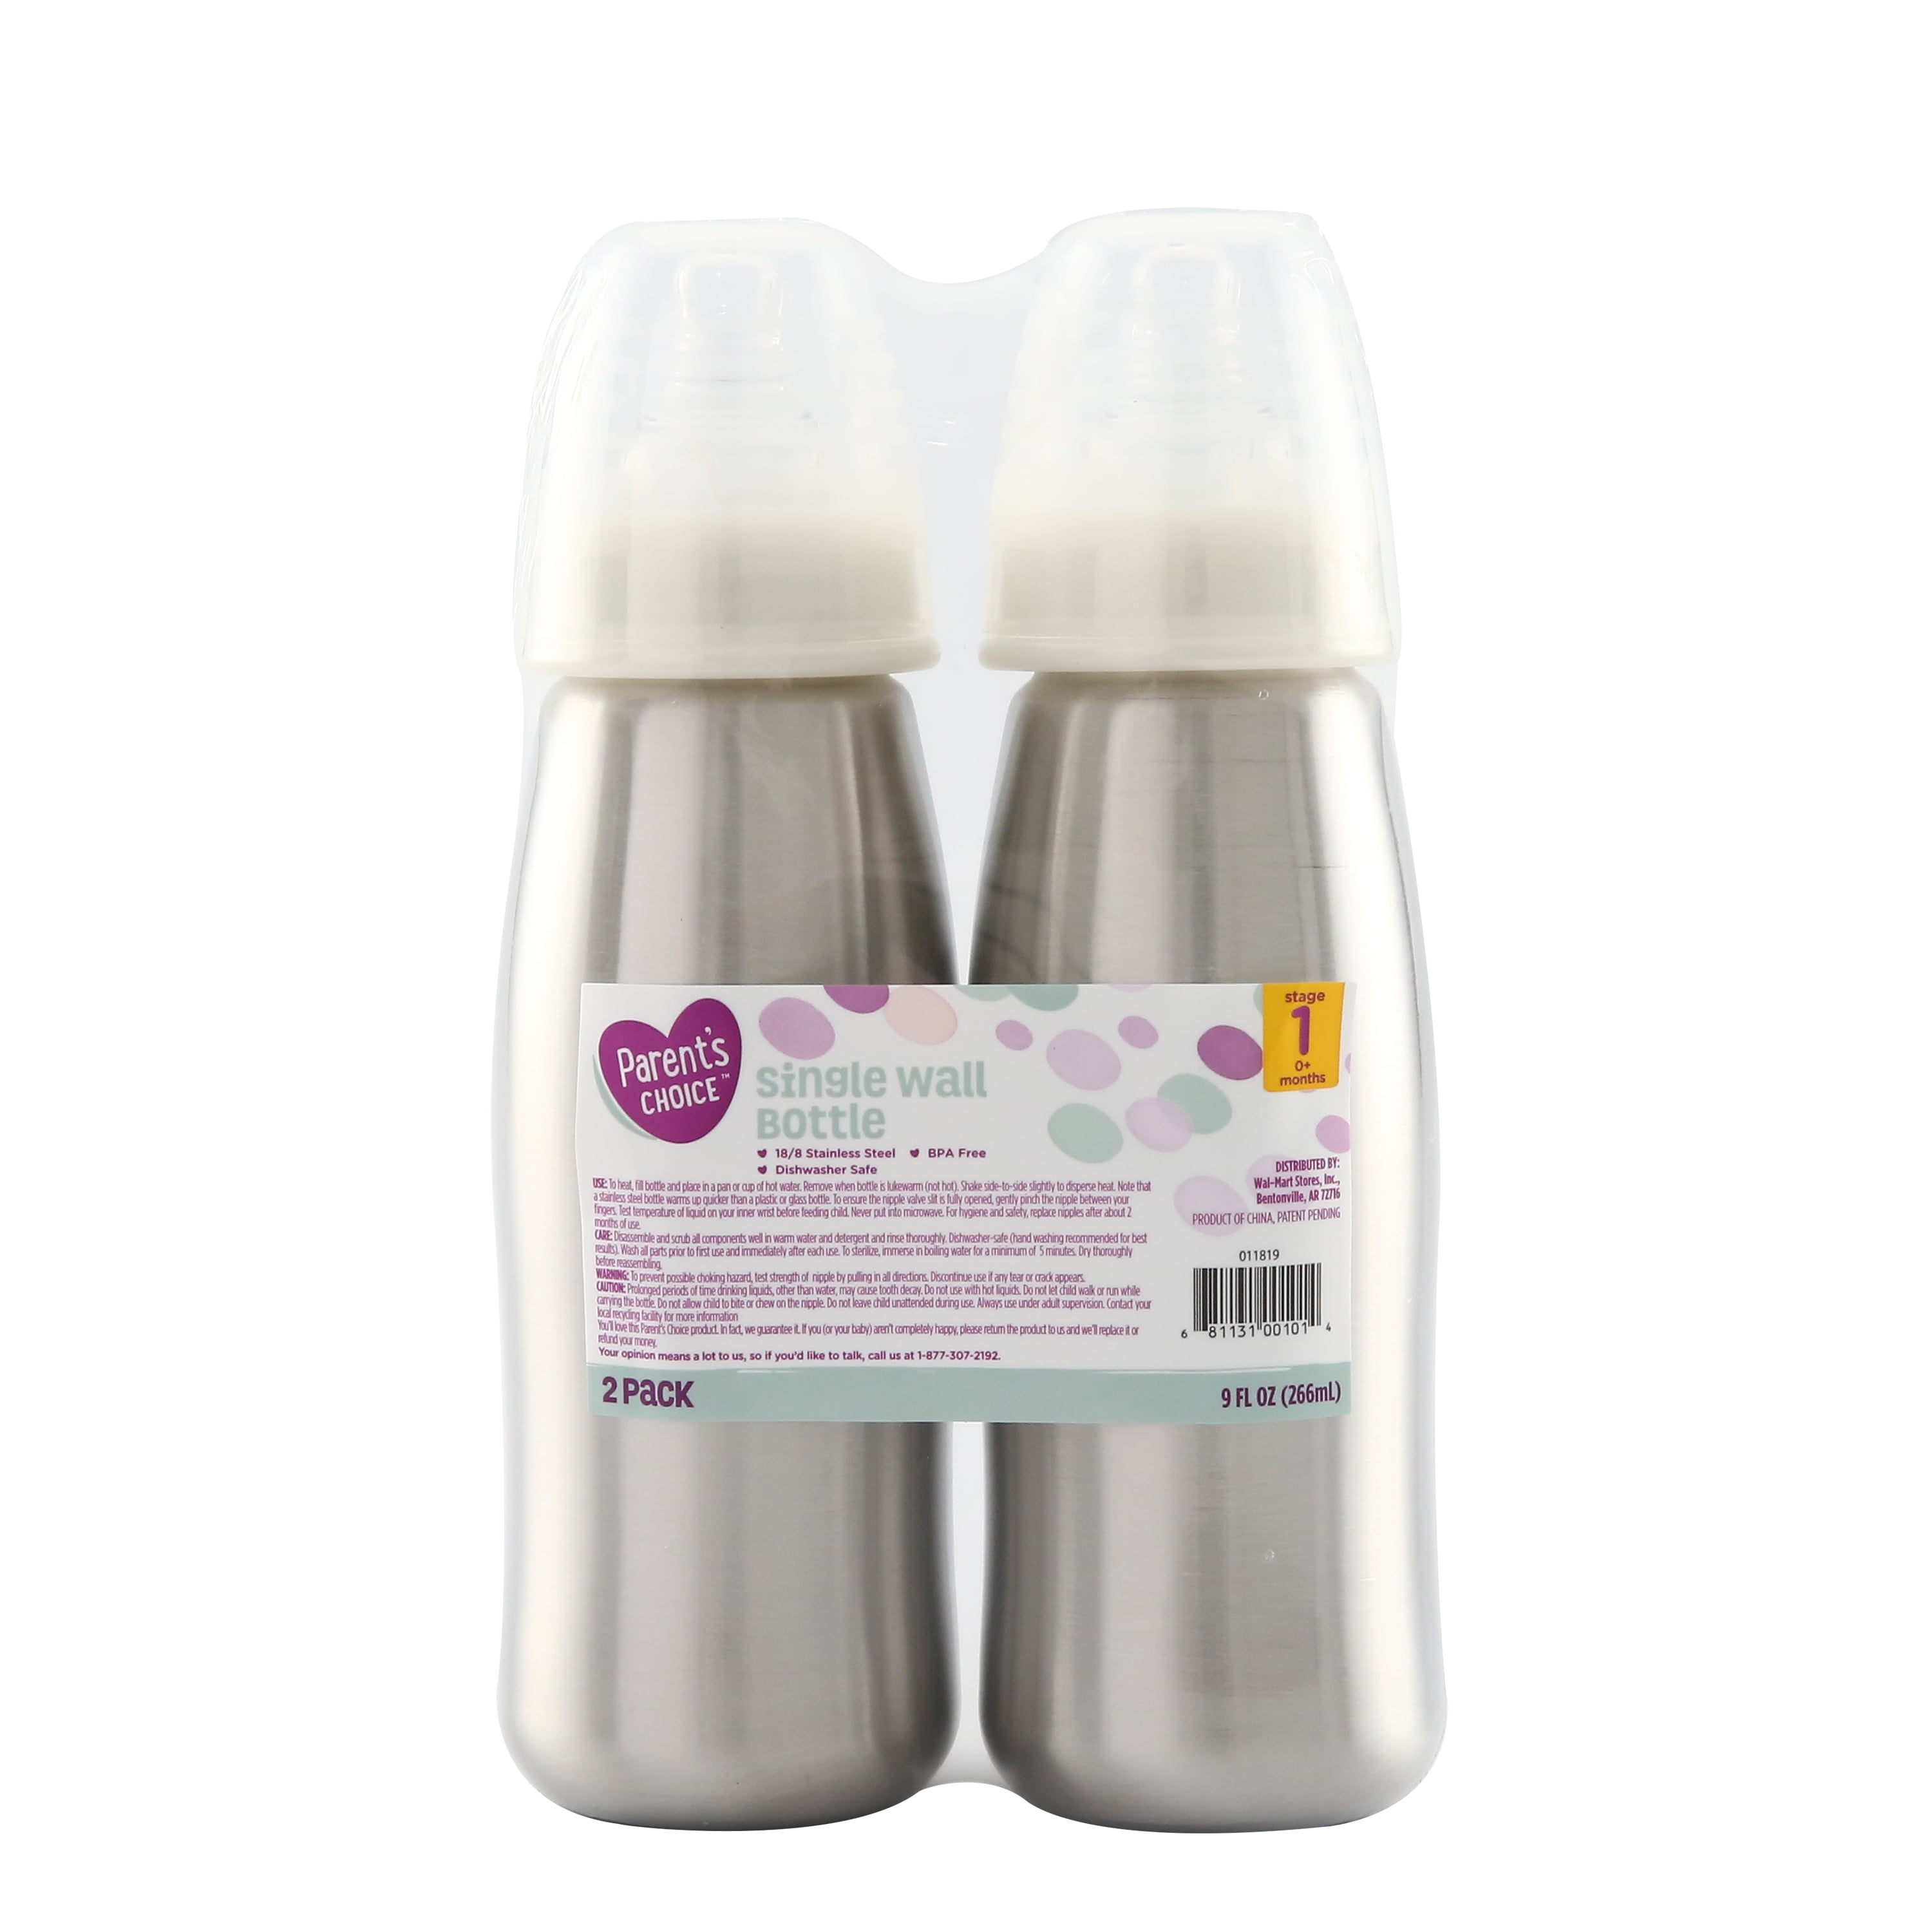 8oz Baby Bottles – The Stainless Depot